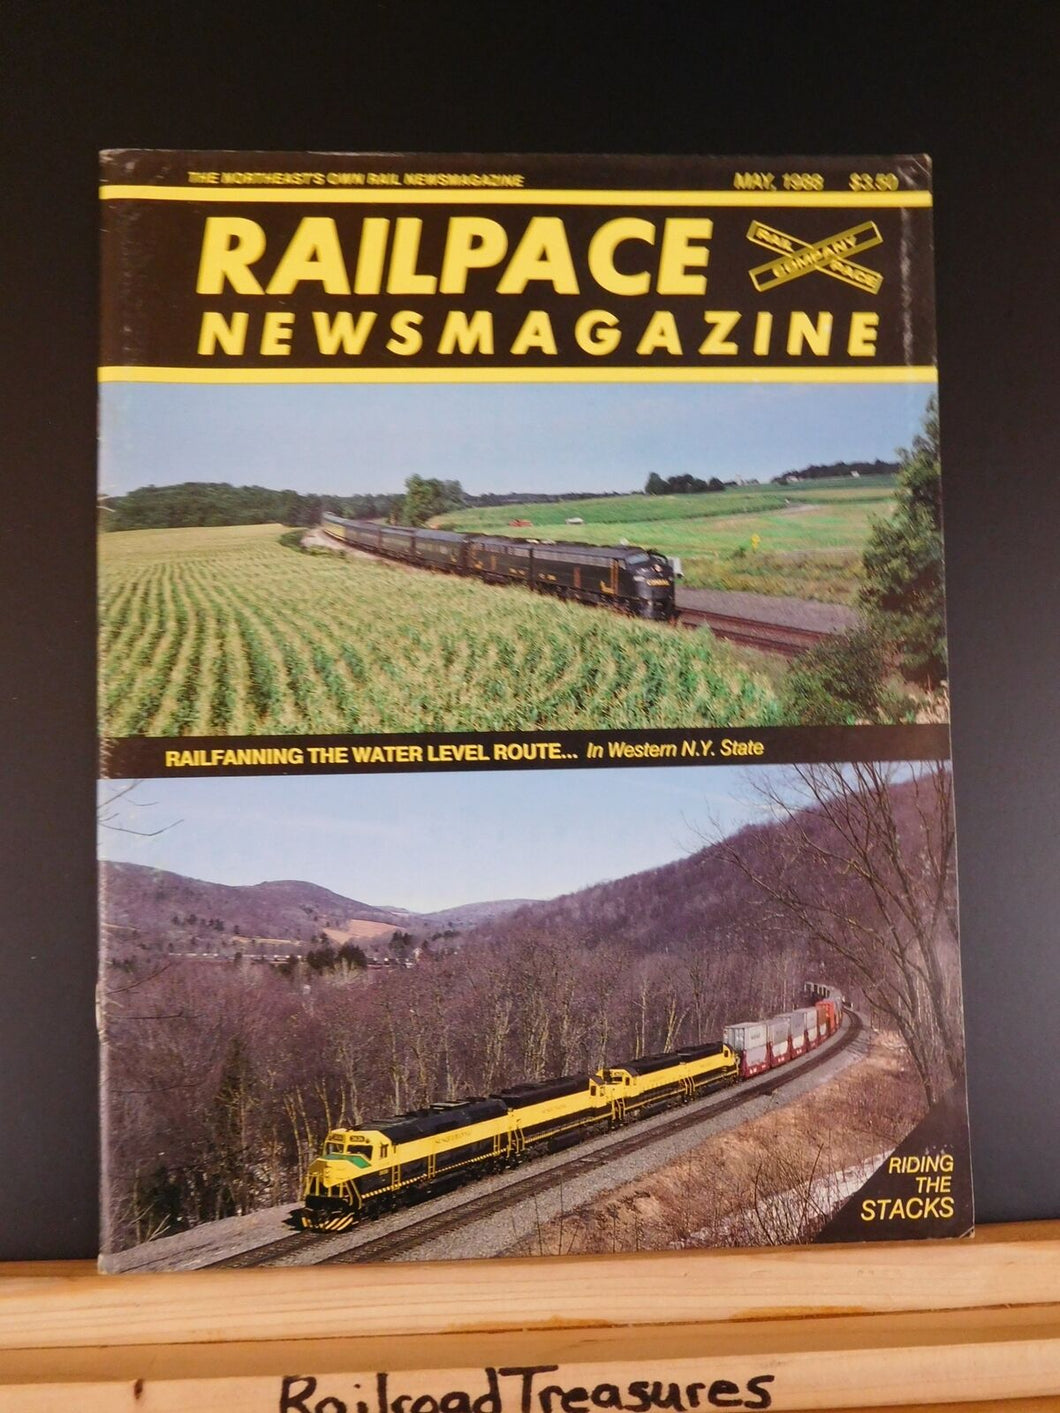 Rail Pace News Magazine 1988 May Railpace Riding the stacks Water Level route LI